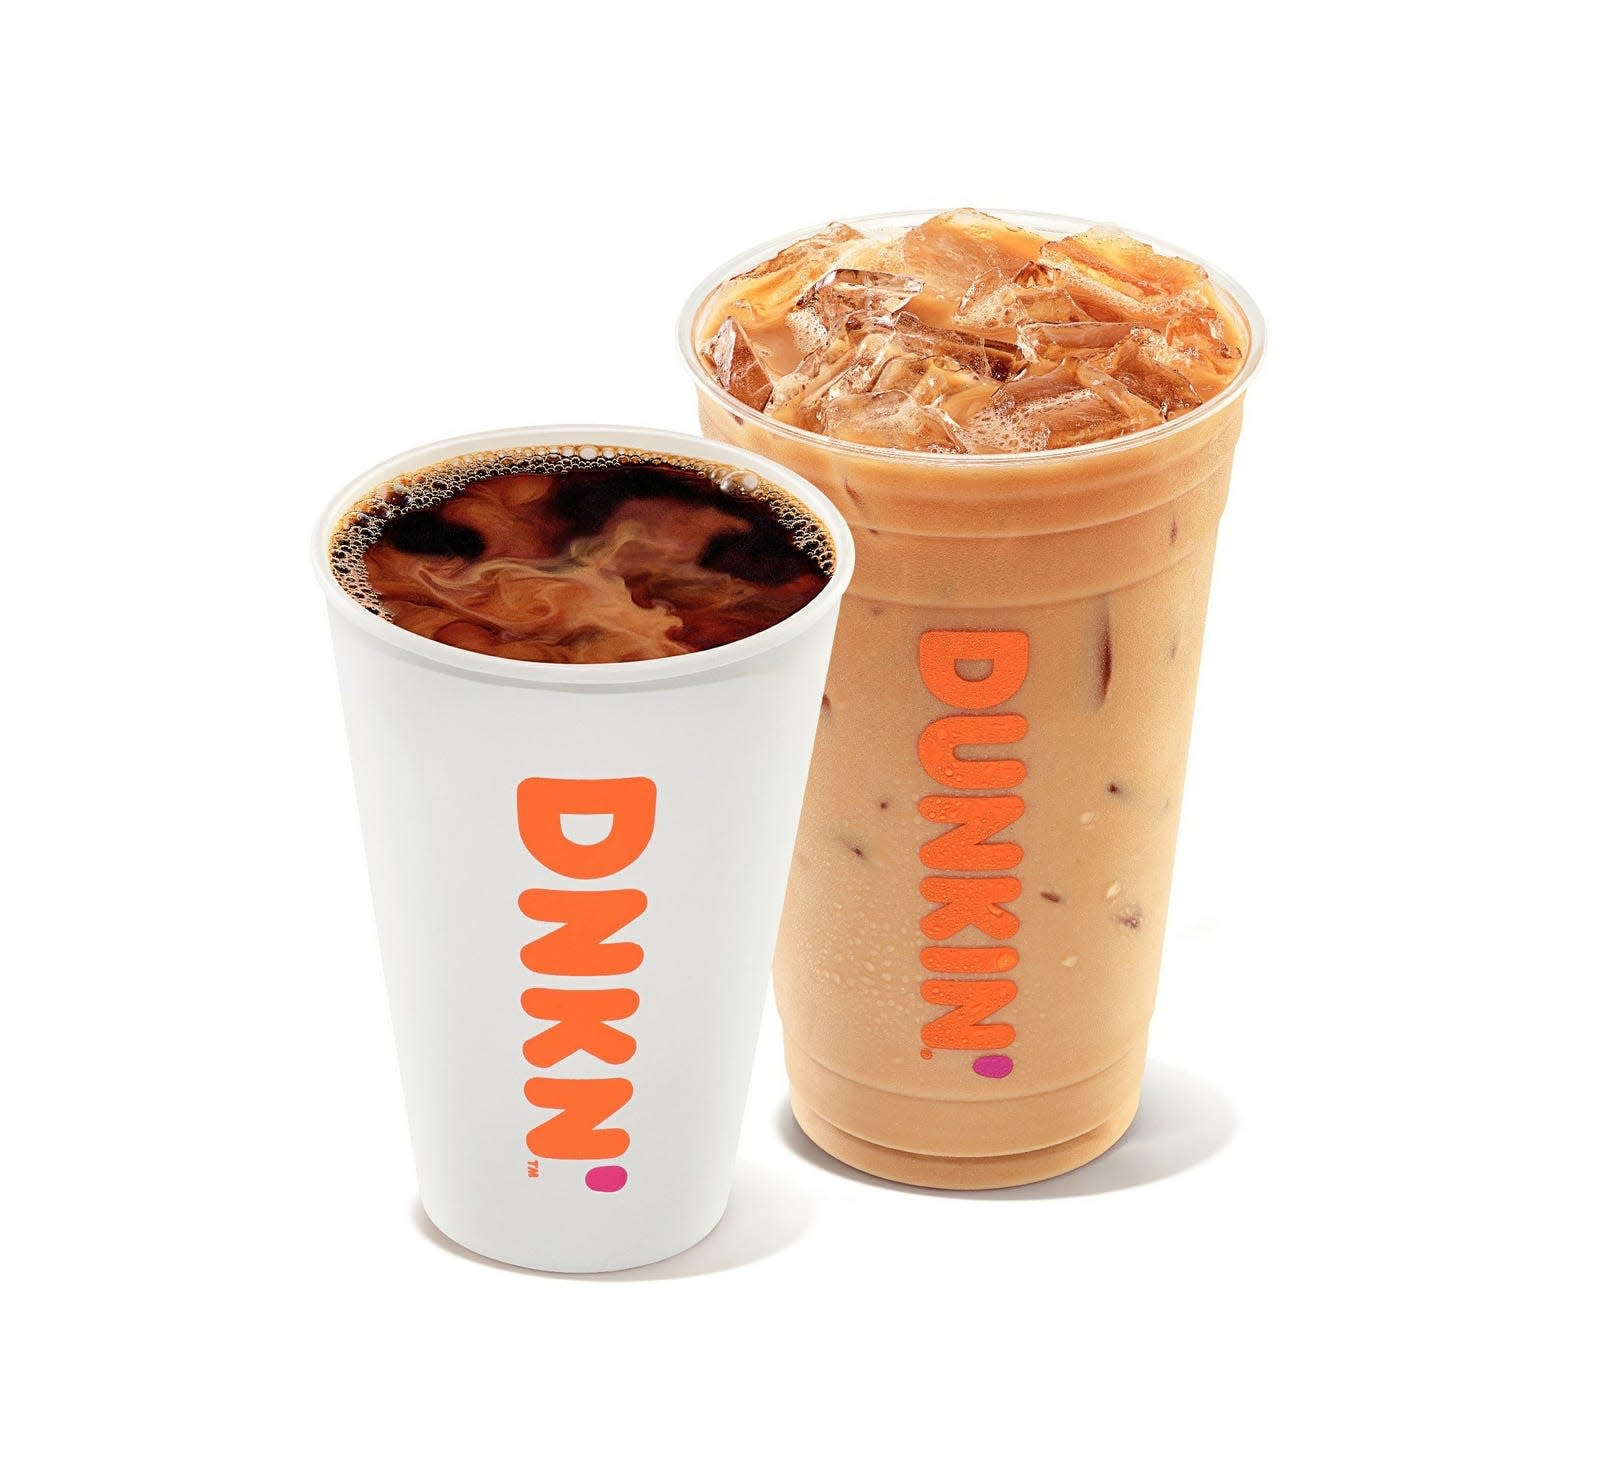 Get free drinks and deals Tuesday at Krispy Kreme, Starbucks, Dunkin’, Panera and more